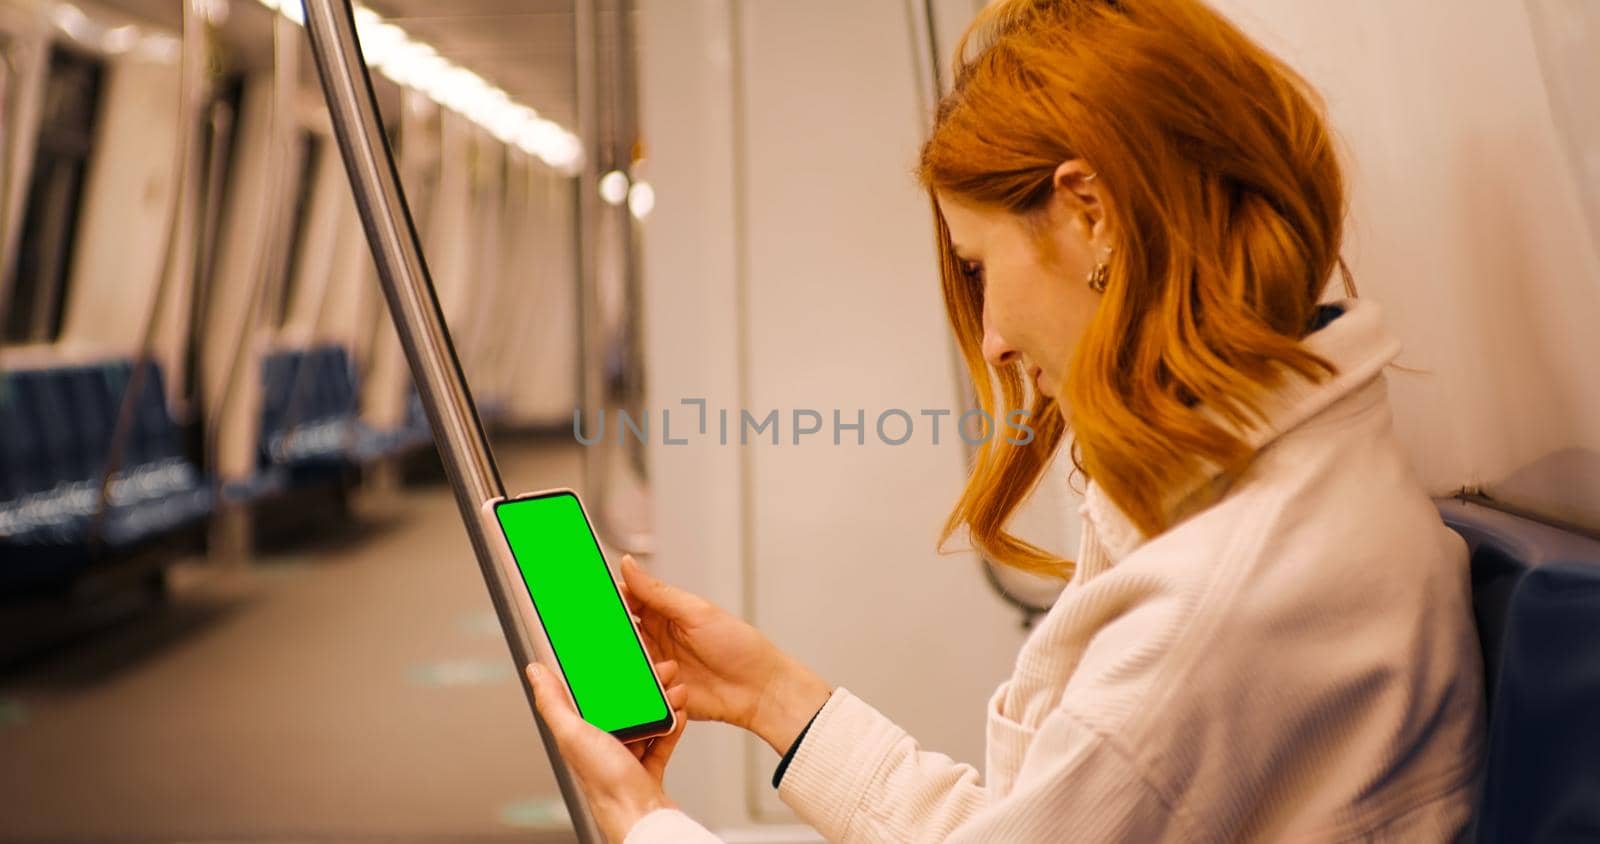 Tourist woman sitting down in a metro and scroll the green screen phone on the train. Using green screen smartphone for advertisement. Lifestyle and transportation concept. Passenger in subway.